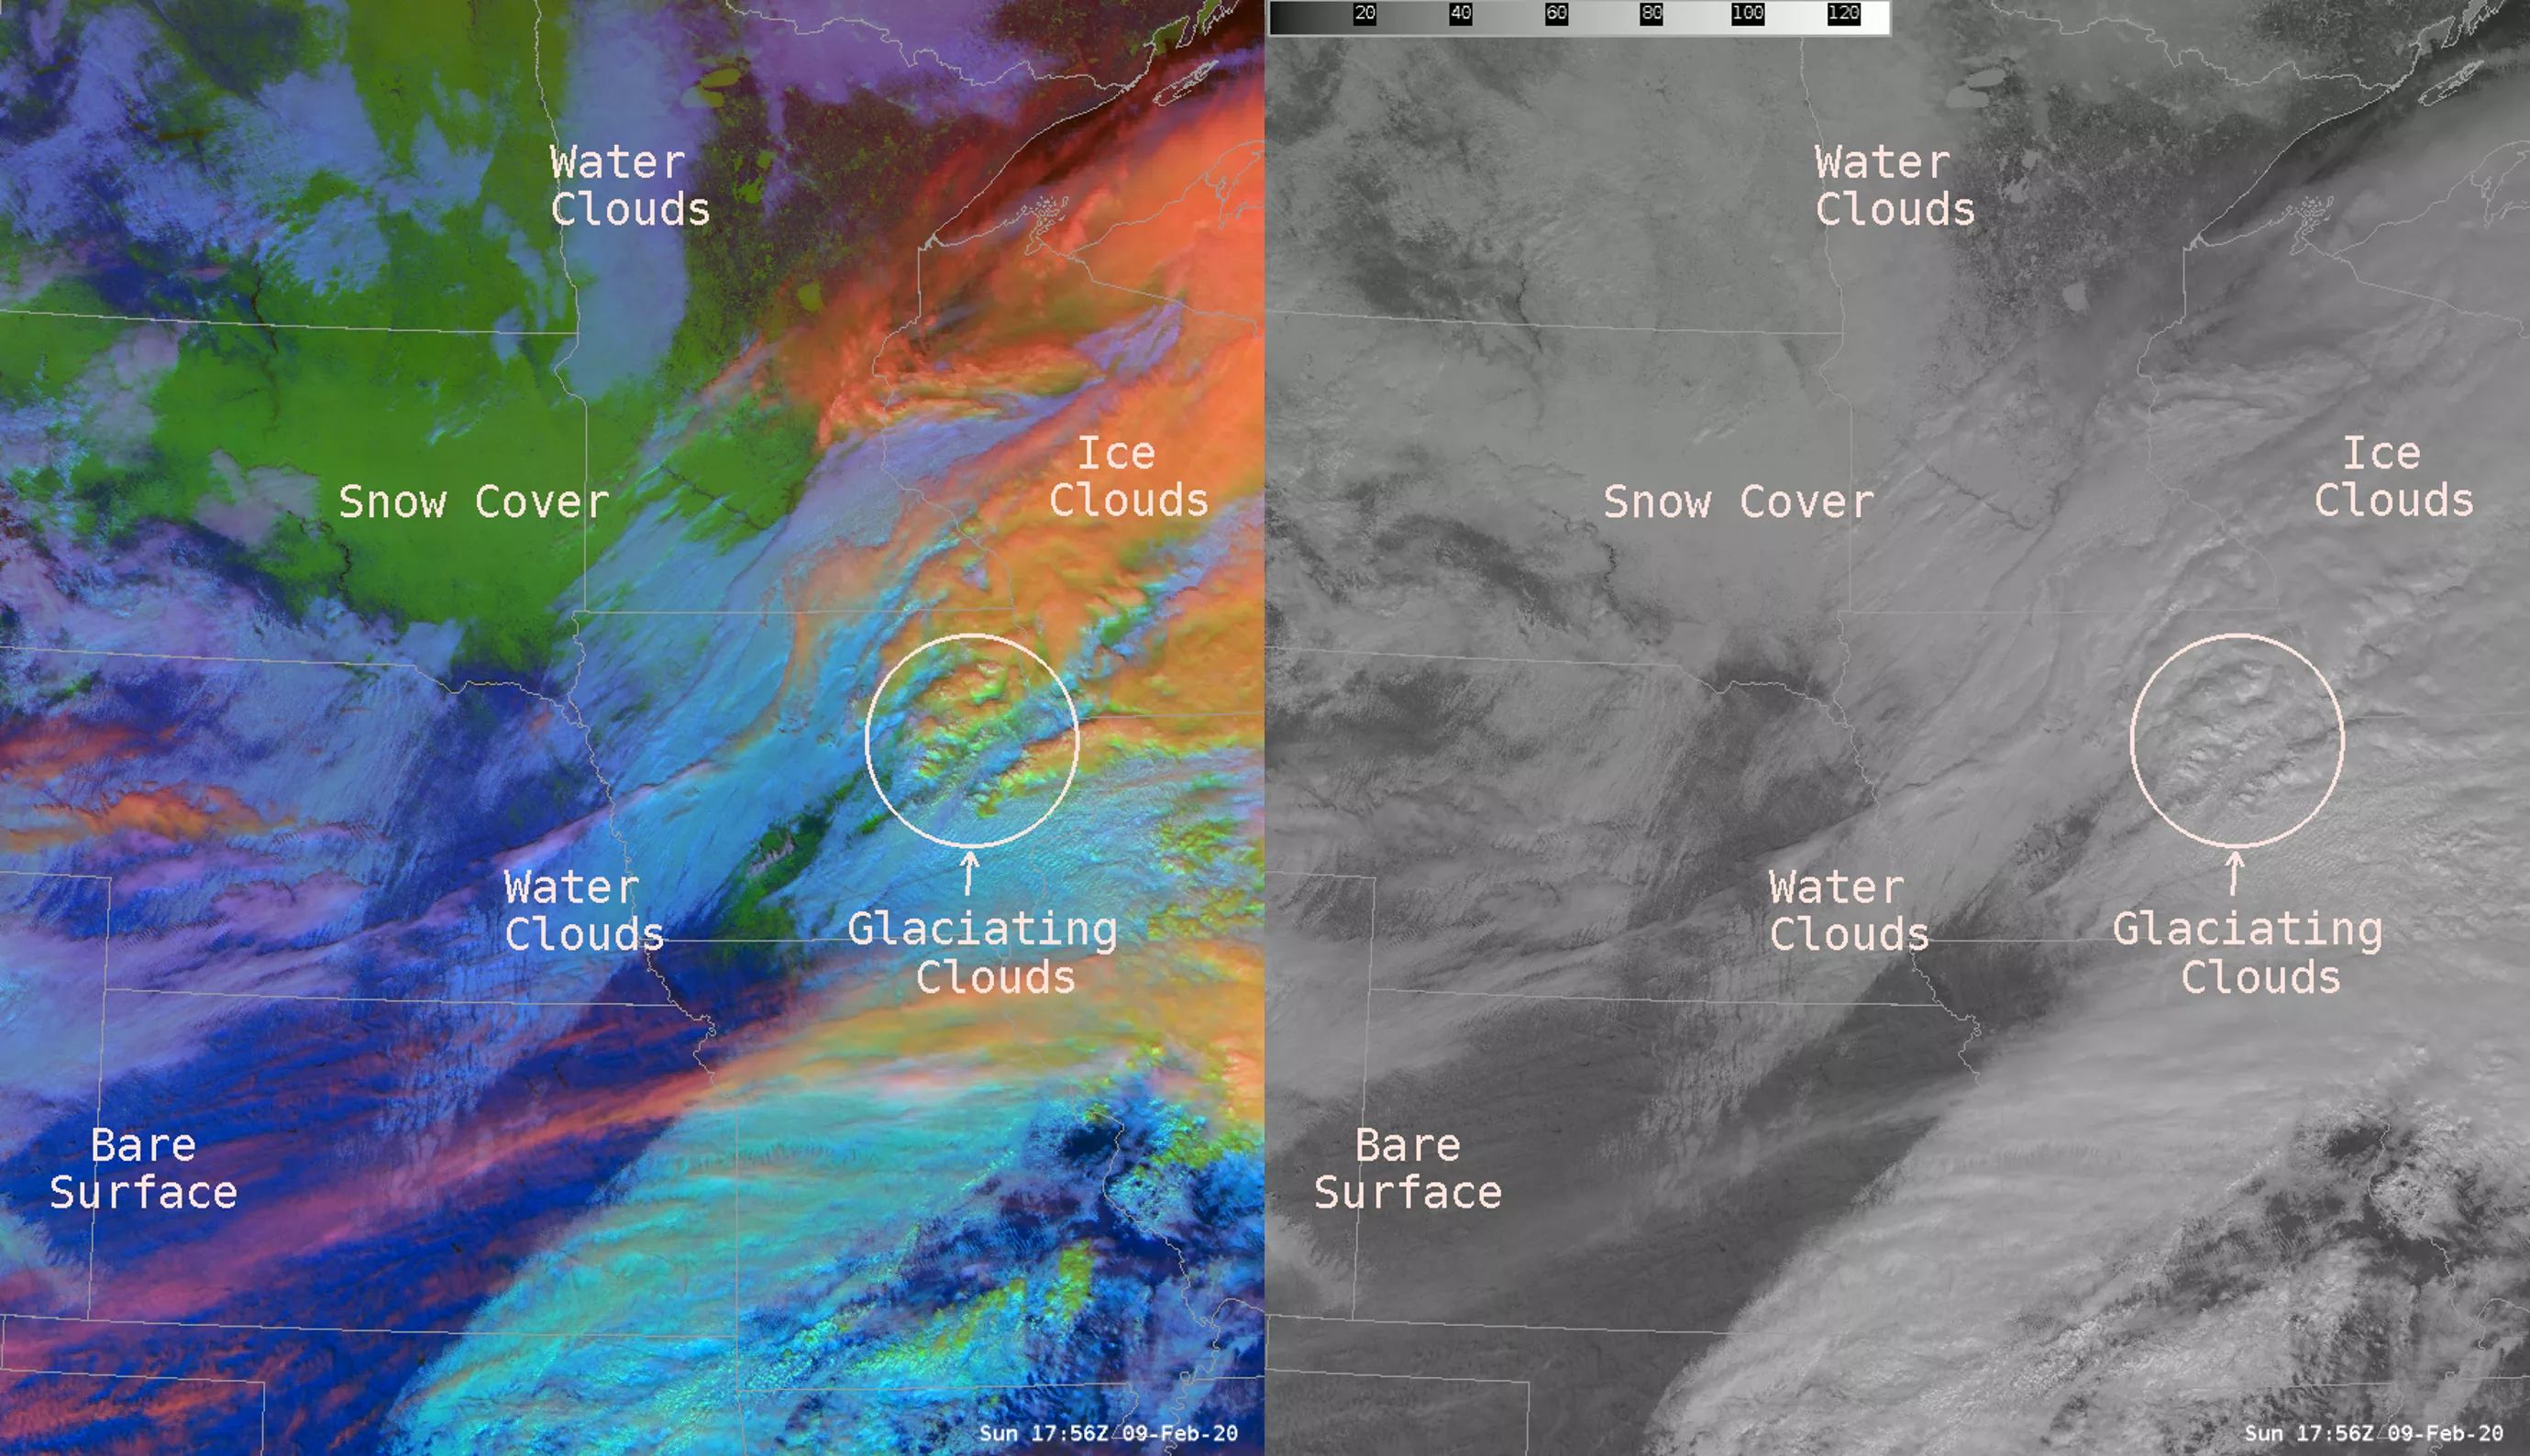 side-by-side comparison of the same scene. The RGB imagery clearly differentiates the water clouds (blue) from the ice clouds (yellow and green). In the visible imagery, everything is in grayscale and the types of clouds can not be differentiated from each other or the background surface.